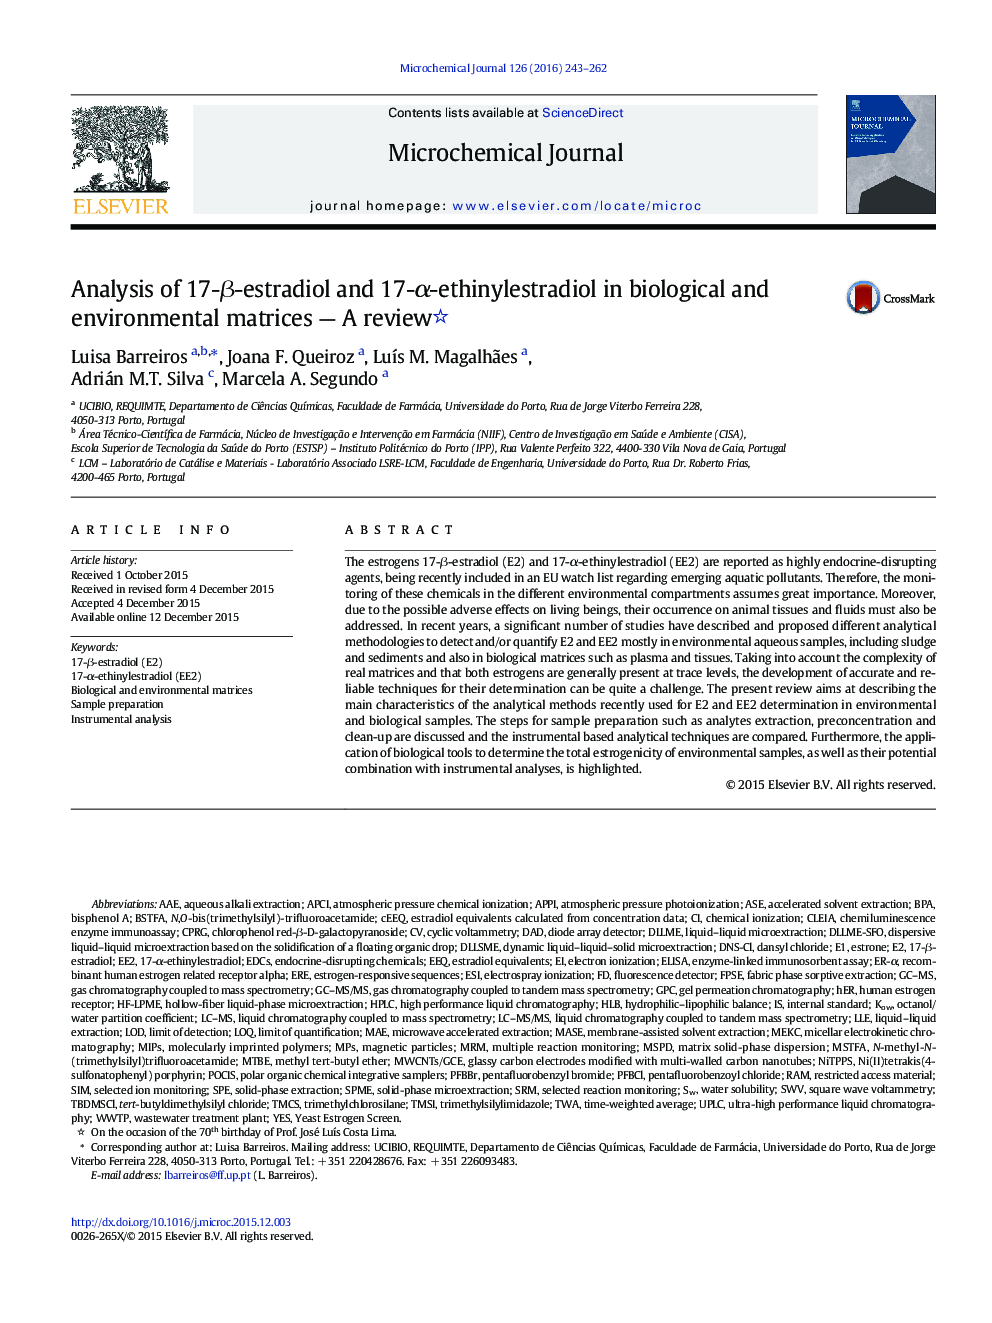 Analysis of 17-Î²-estradiol and 17-Î±-ethinylestradiol in biological and environmental matrices - A review